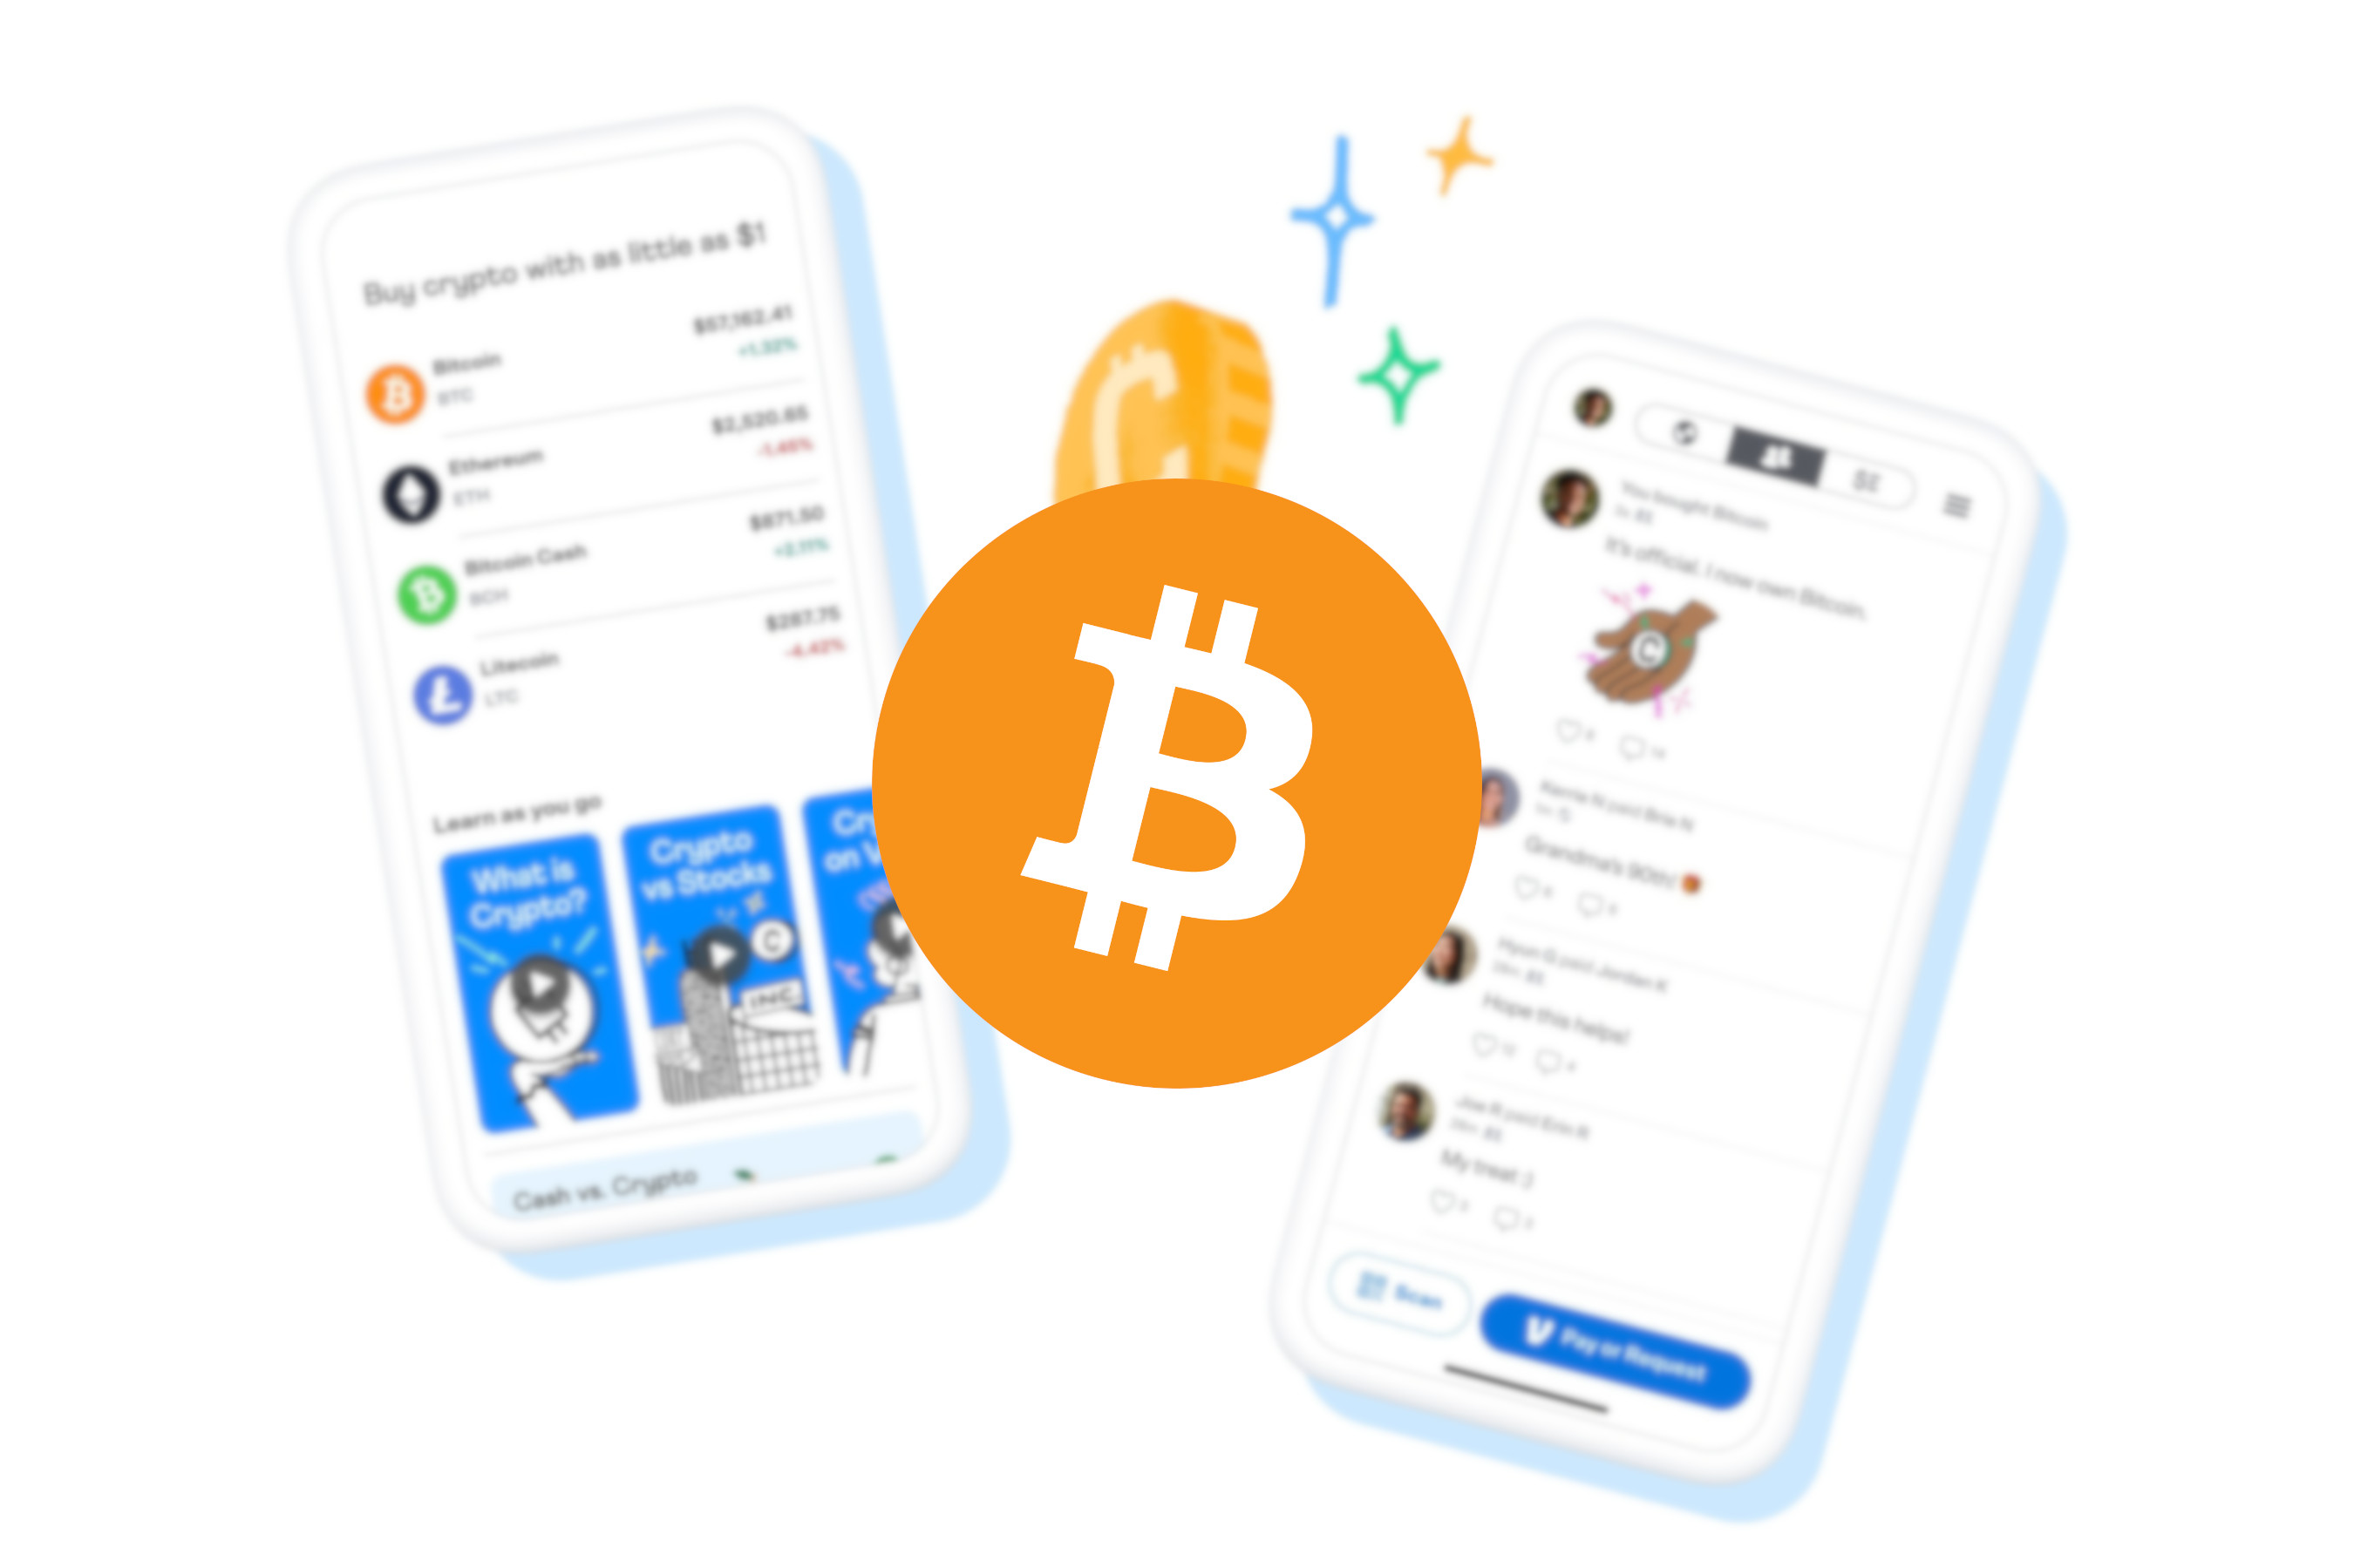 PayPal and Venmo will let you send cryptocurrency to third-party wallets